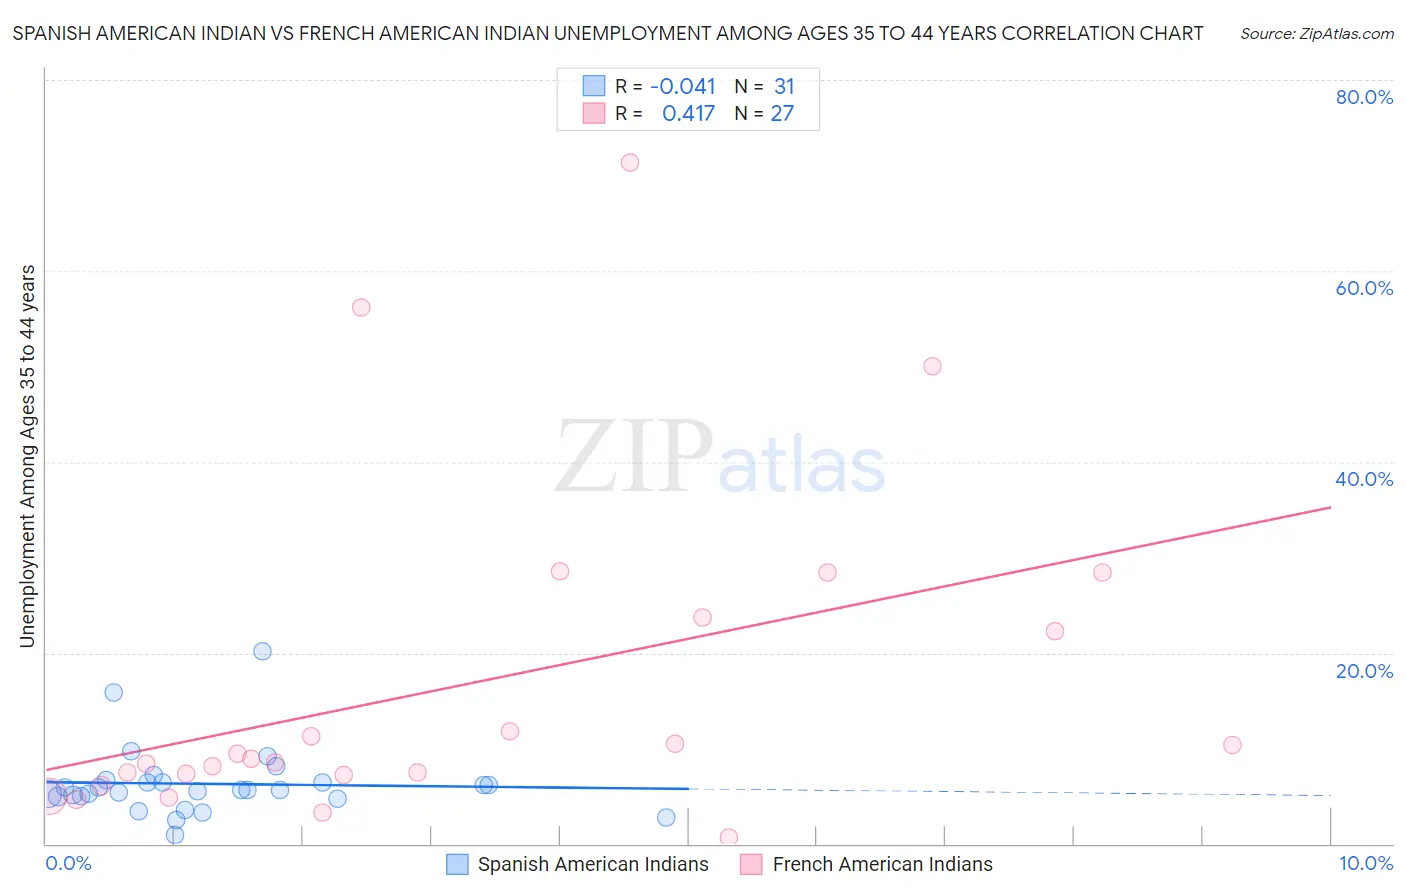 Spanish American Indian vs French American Indian Unemployment Among Ages 35 to 44 years